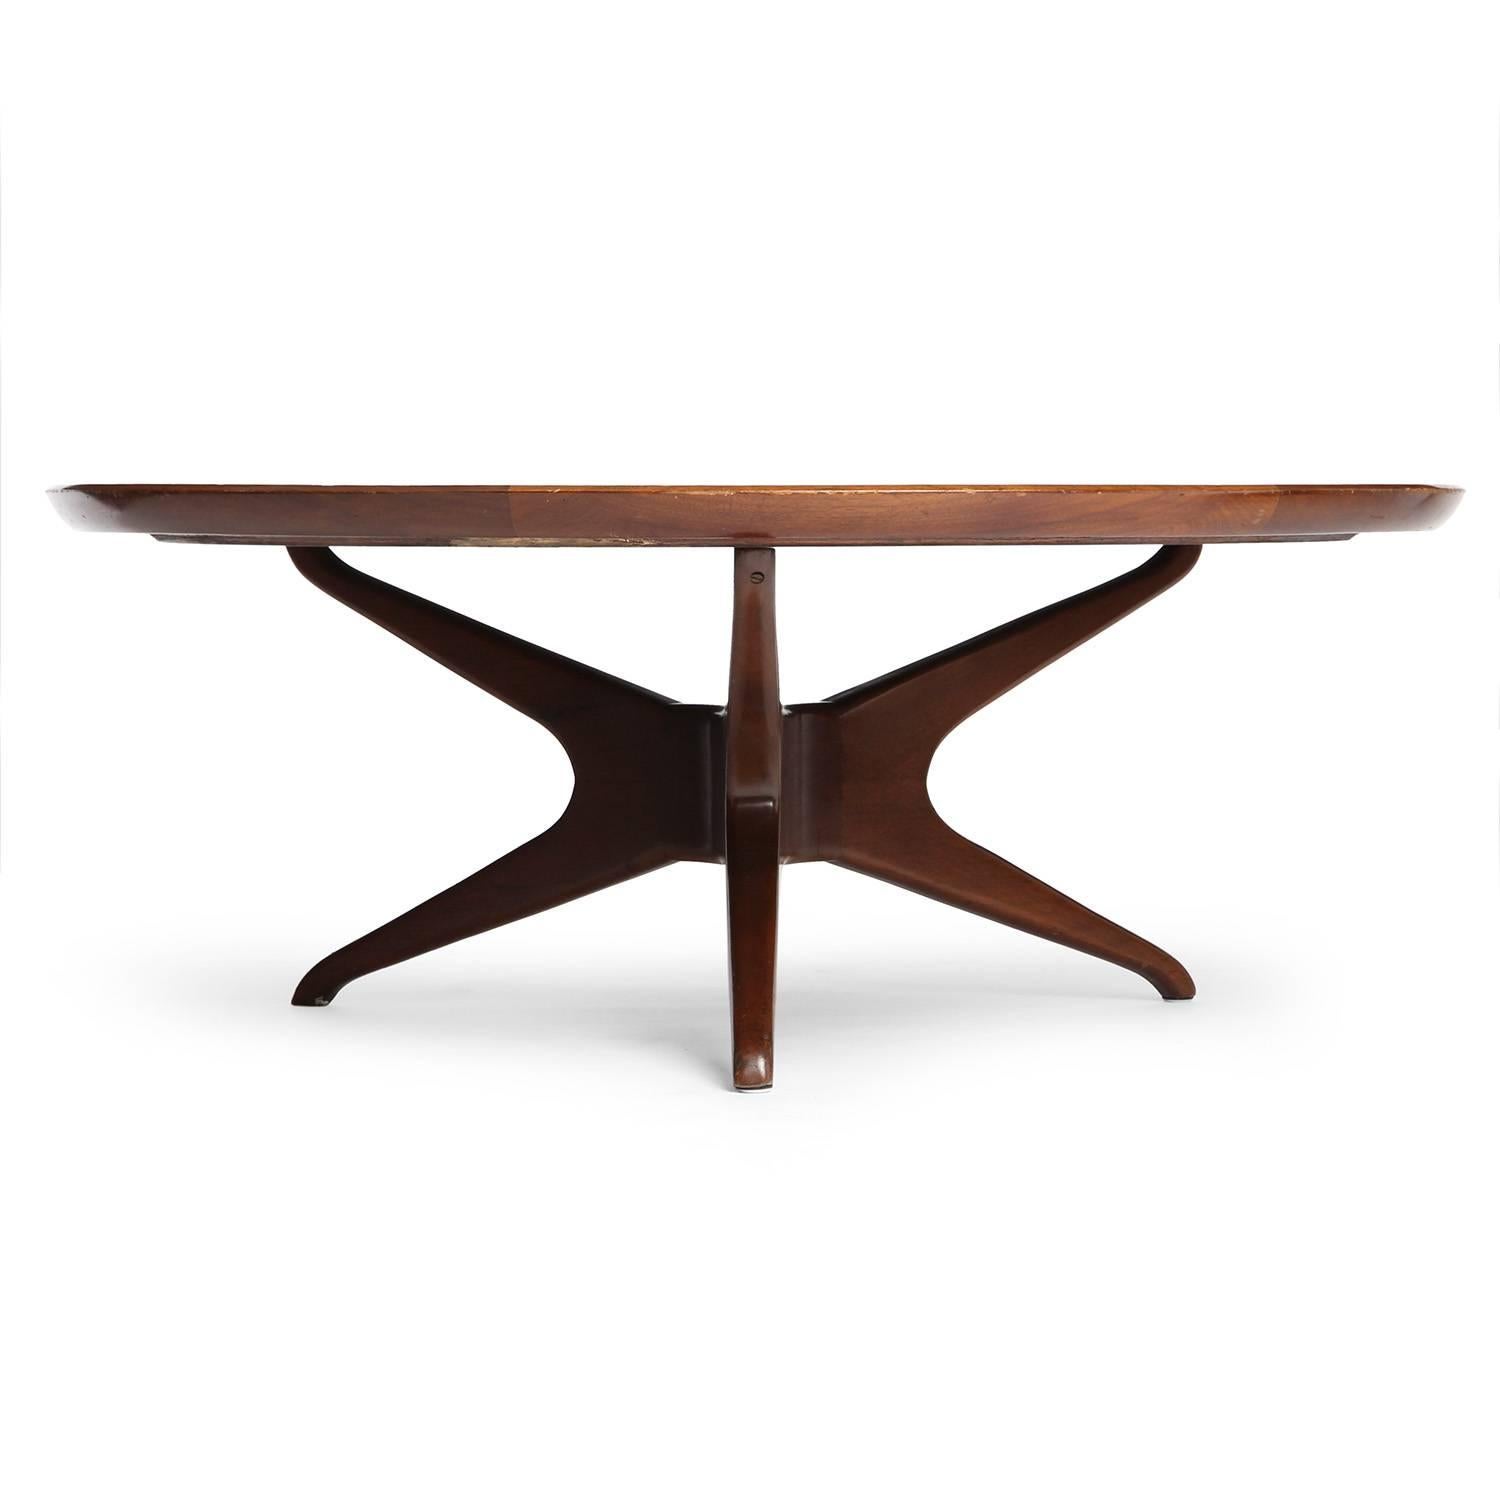 Mid-20th Century Sculptural Capiz Topped Low Table